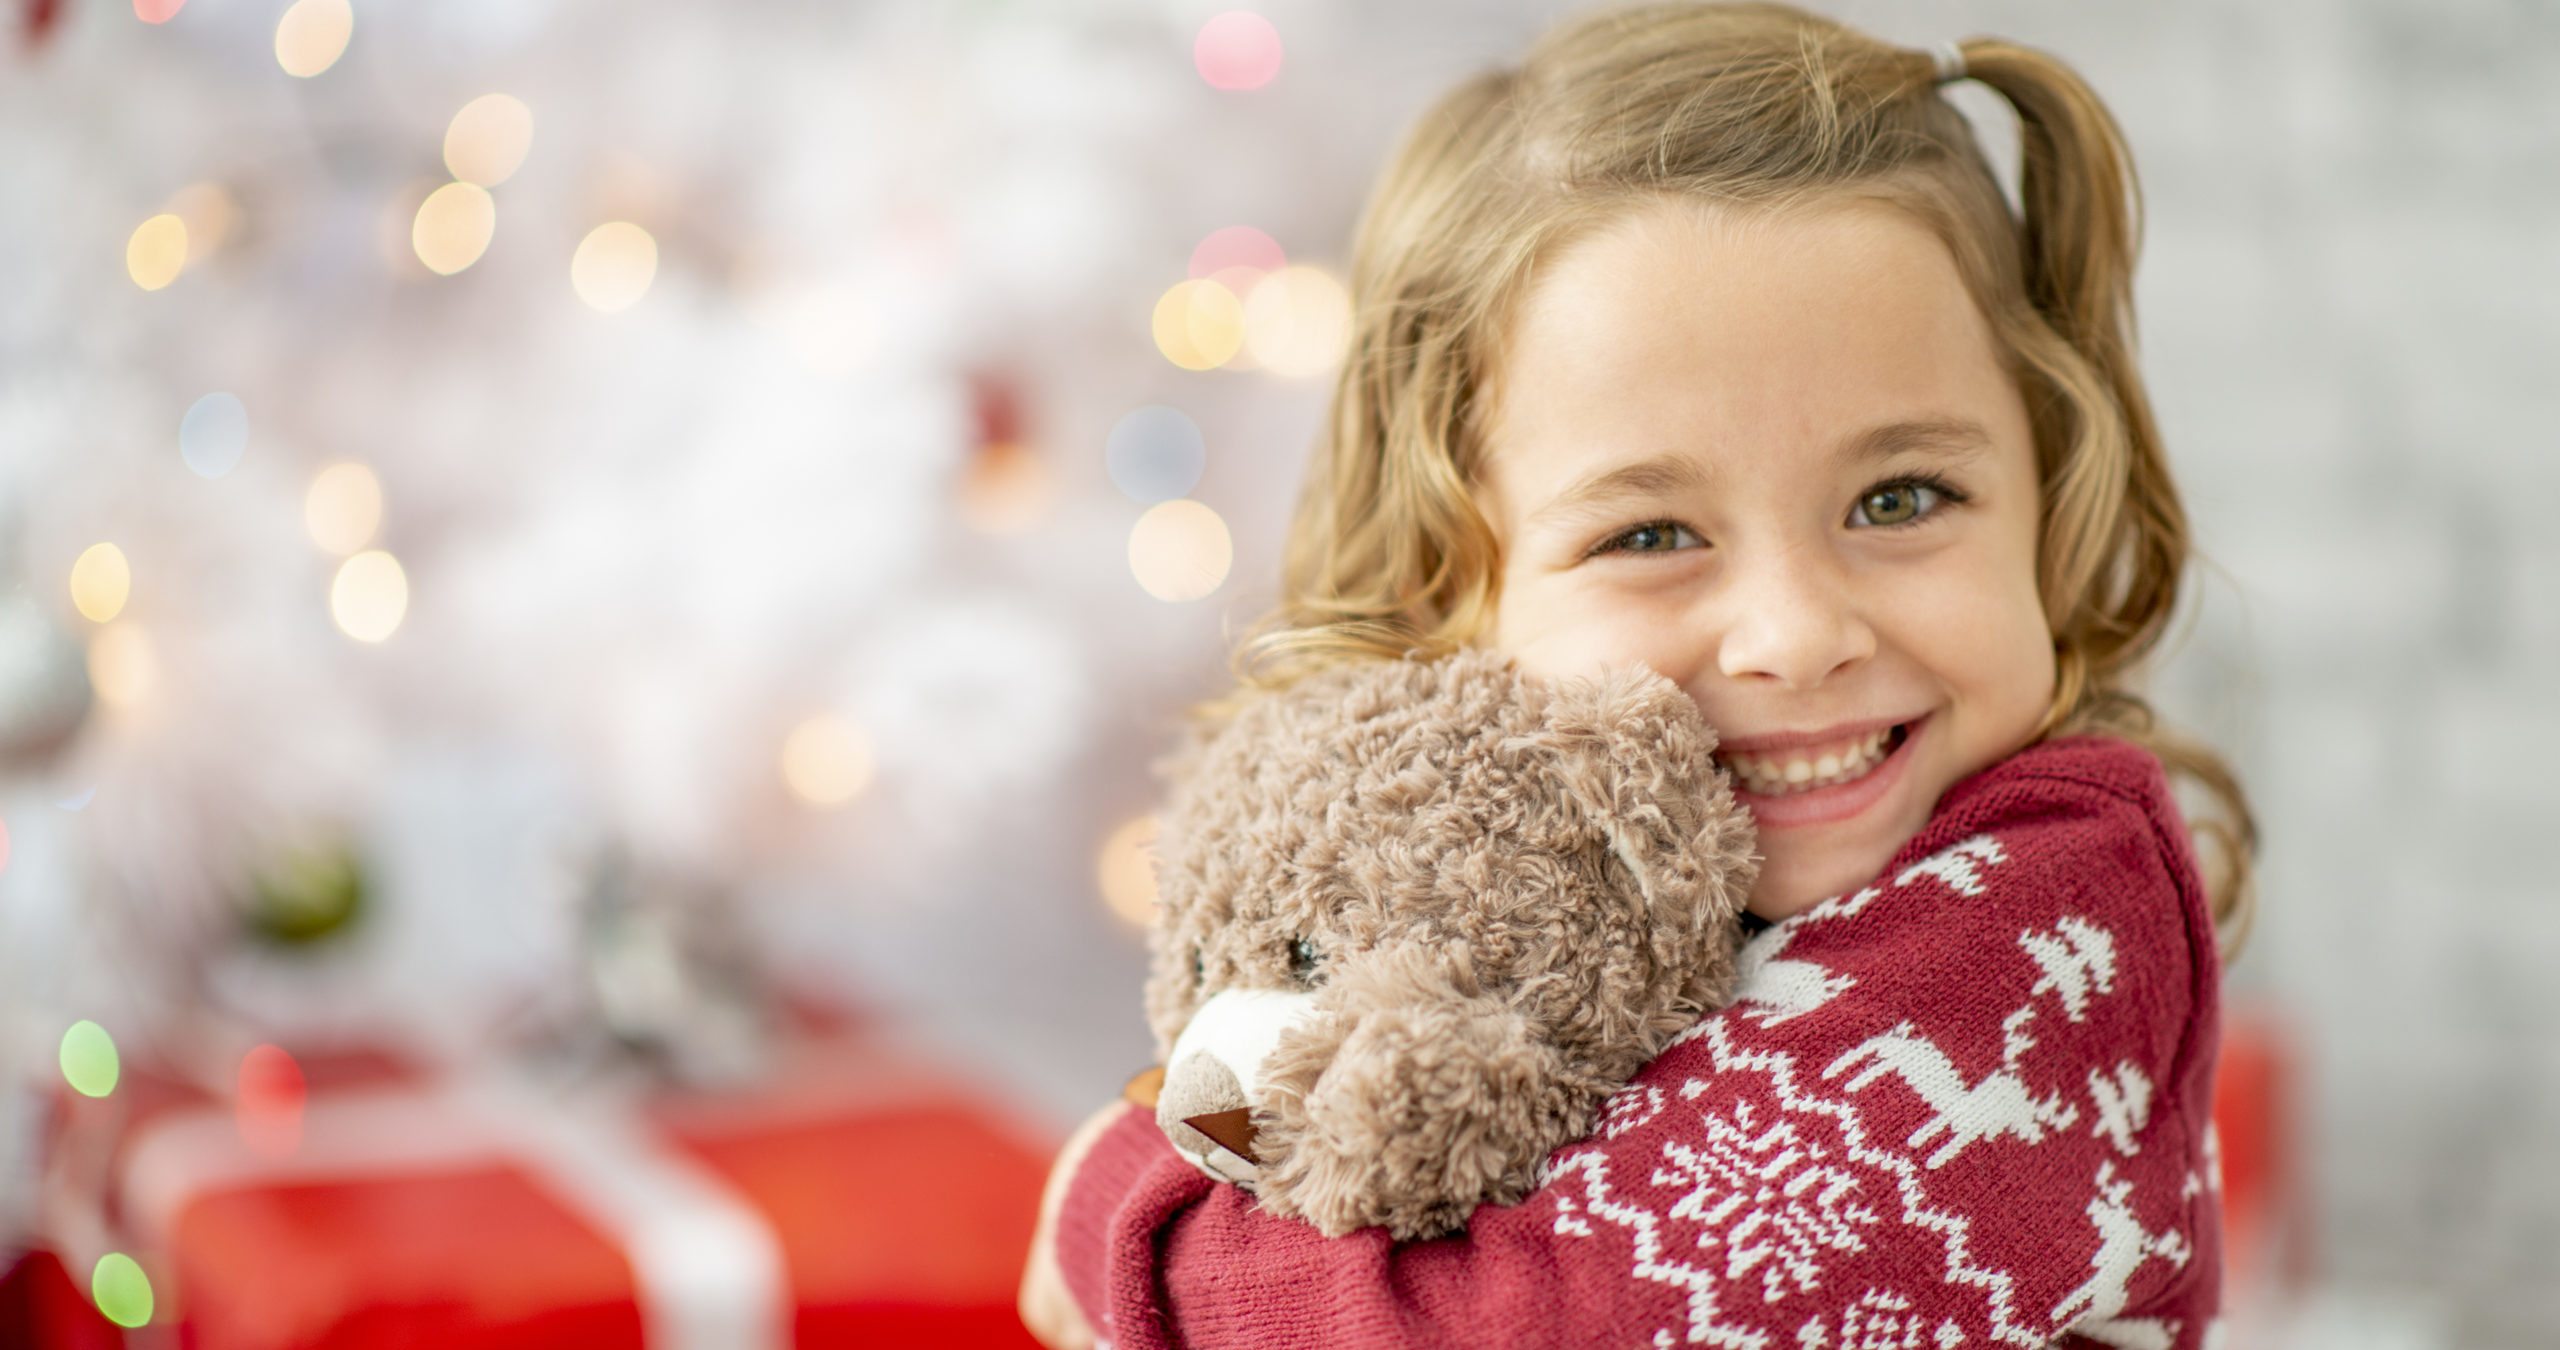 Participate in a Gift Drive to Grant Wishes this Holiday Season